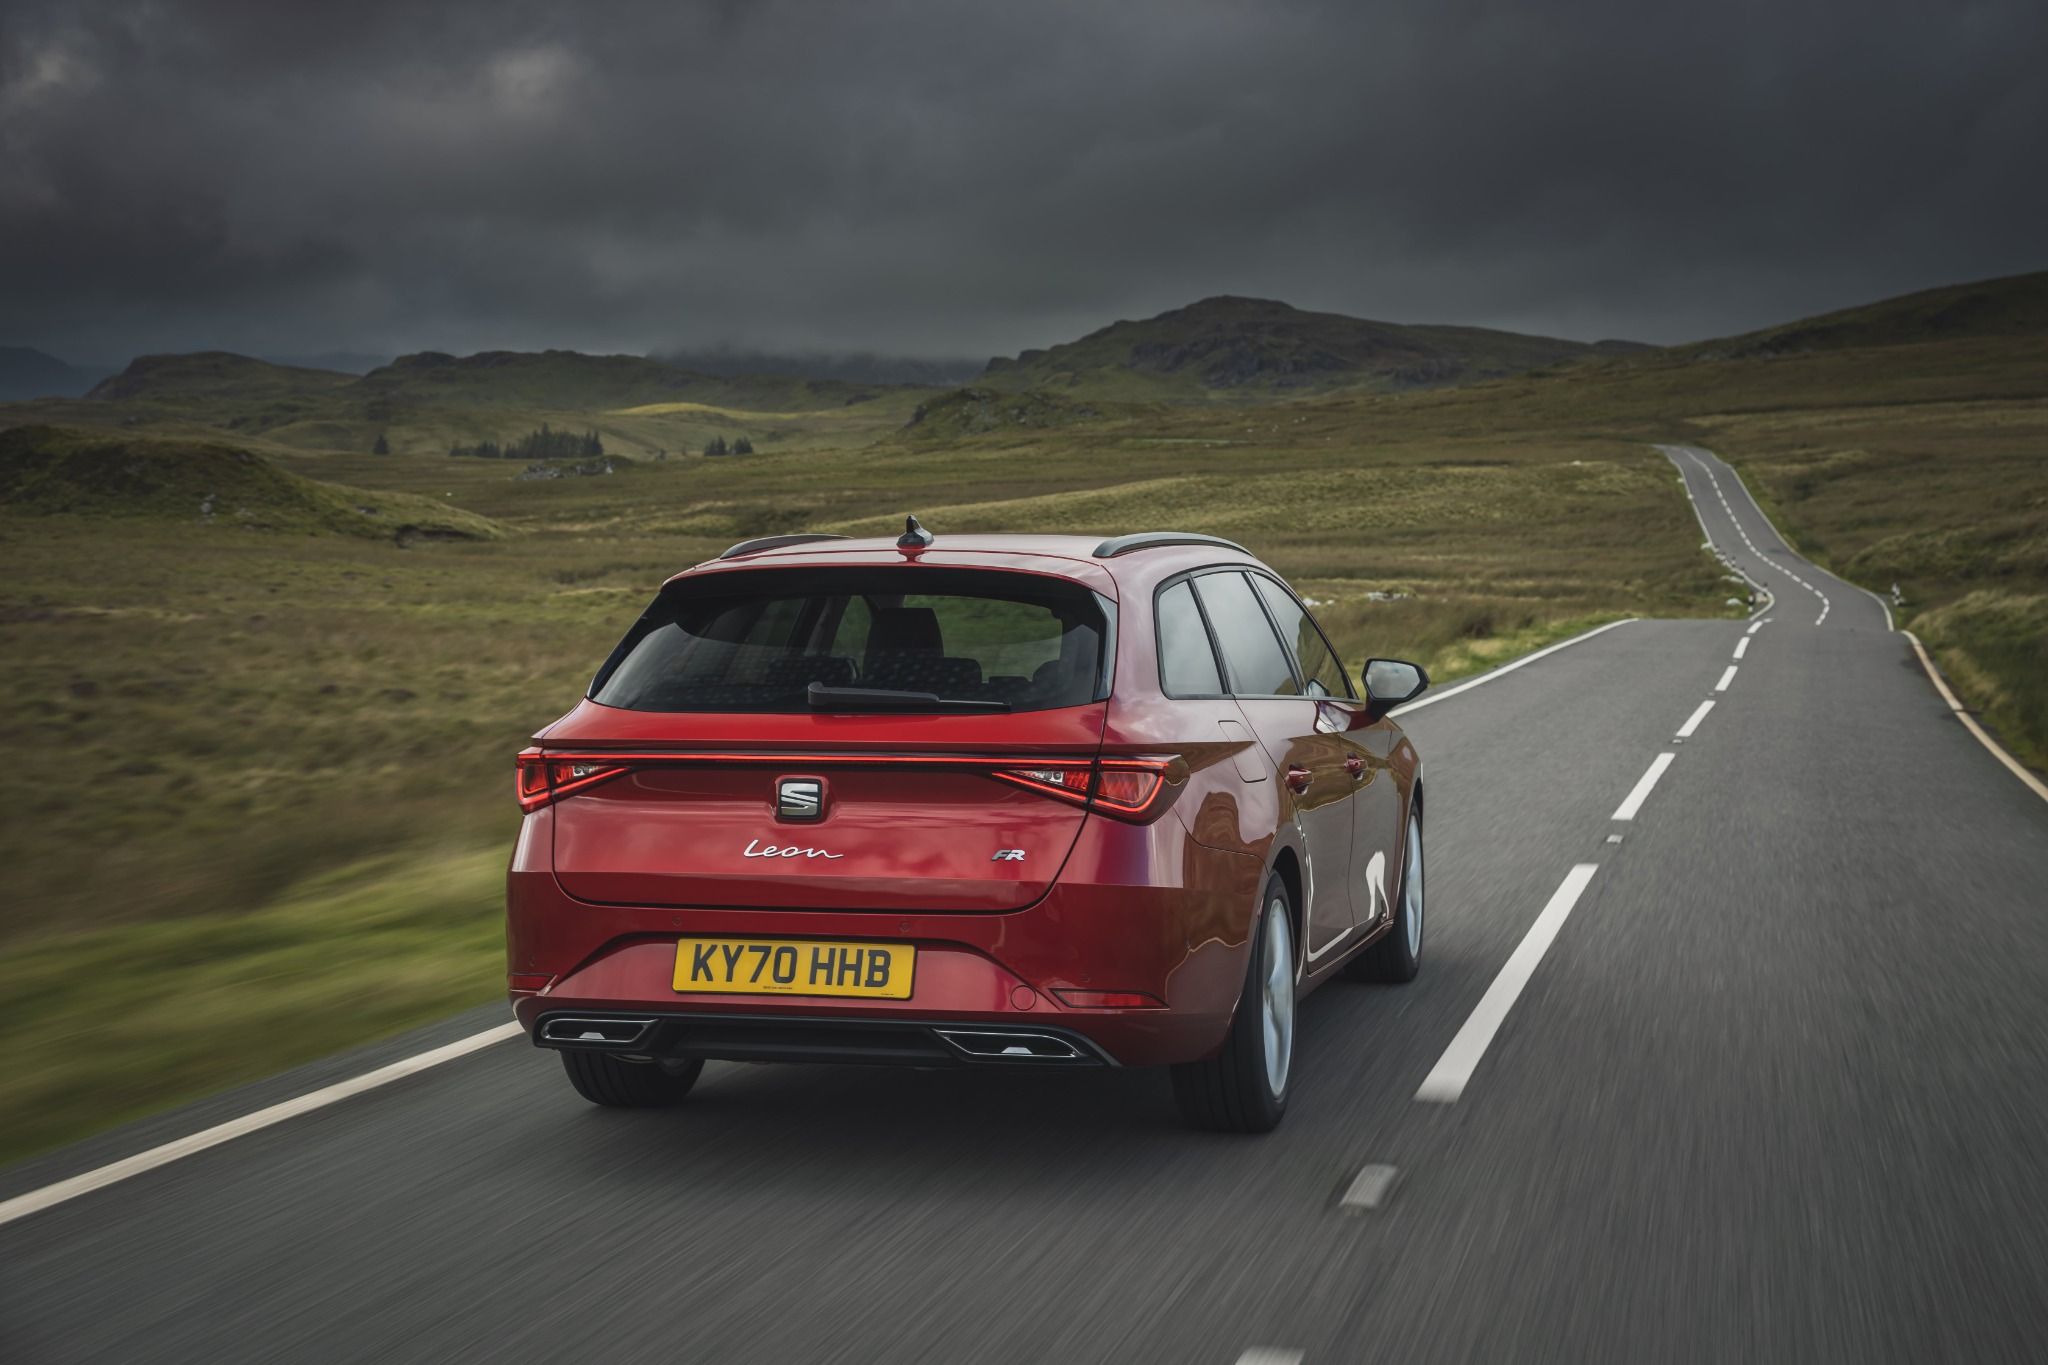 Red SEAT Leon Estate rear driving down the road